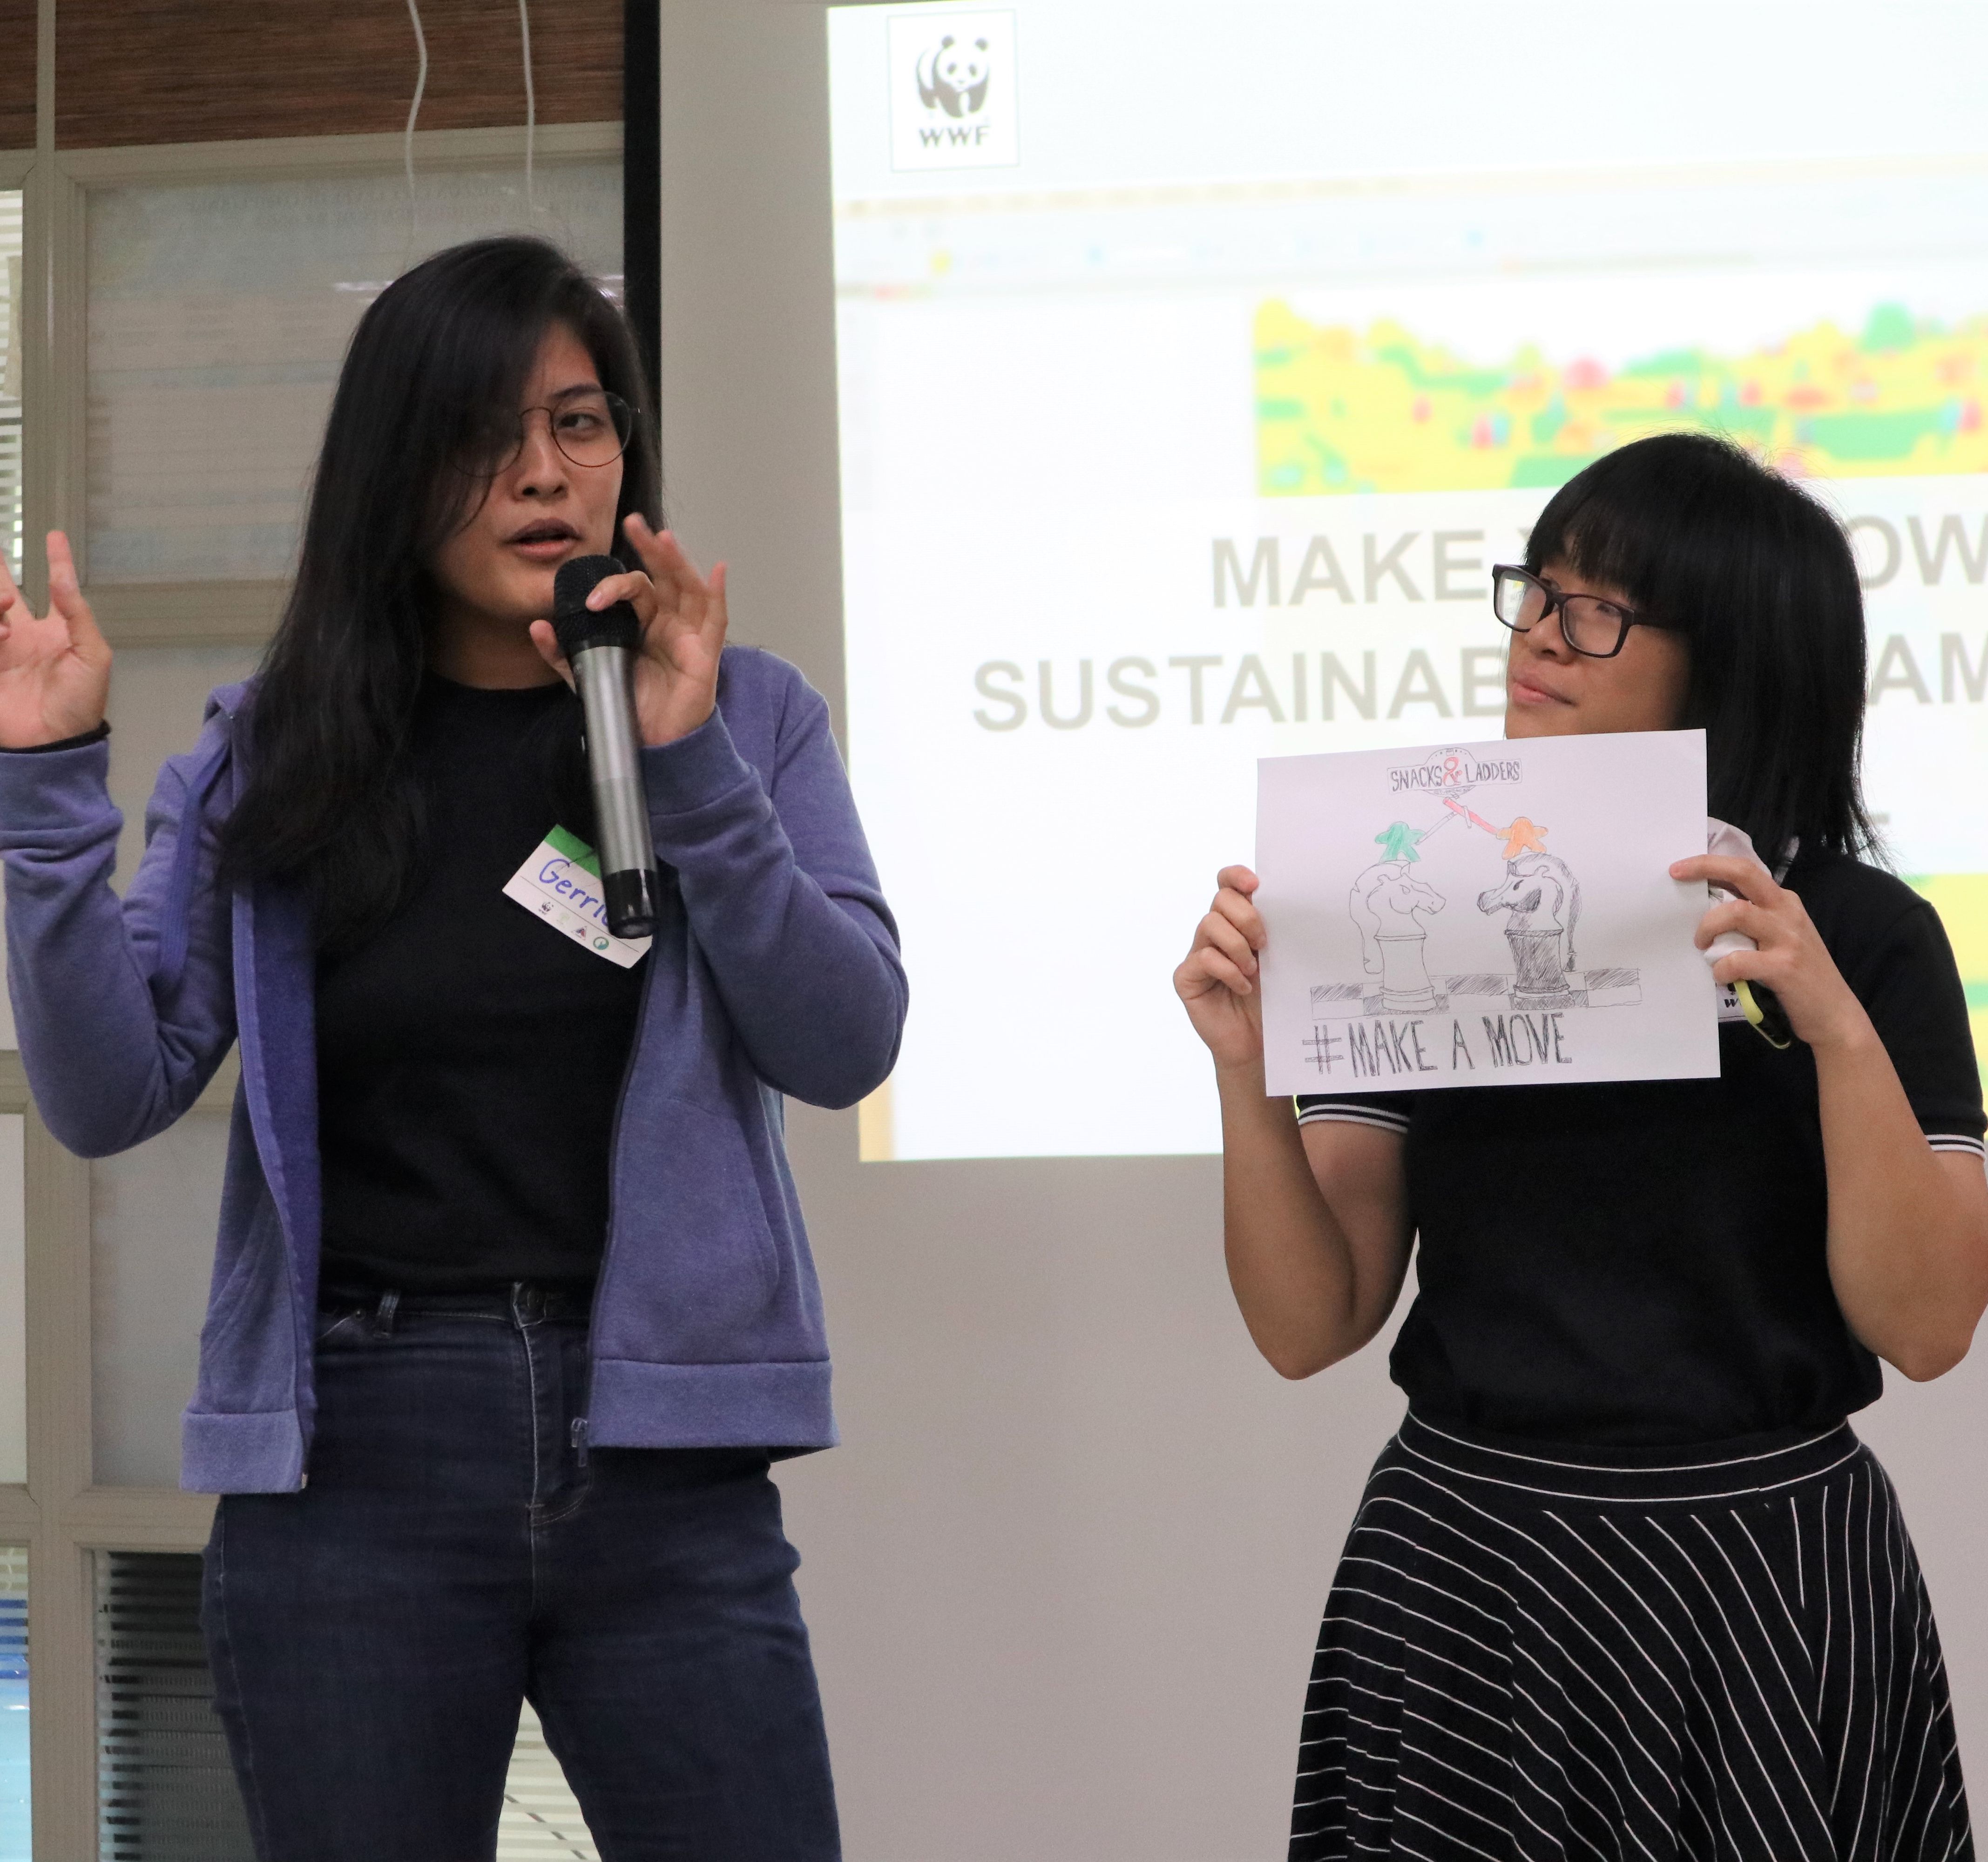 <h1>Manage Food Waste, Market Sustainability</h1>
<p>Last March 26, 2019, World Wide Fund for Nature (WWF) Philippines’ The Sustainable Diner: A Key Ingredient for Sustainable Tourism</p>
<p style="text-align: right;"><a href="https://support.wwf.org.ph/what-we-do/food/thesustainablediner/food-waste-management-and-marketing-sustainability/" target="_blank">Read More &gt;</a></p>